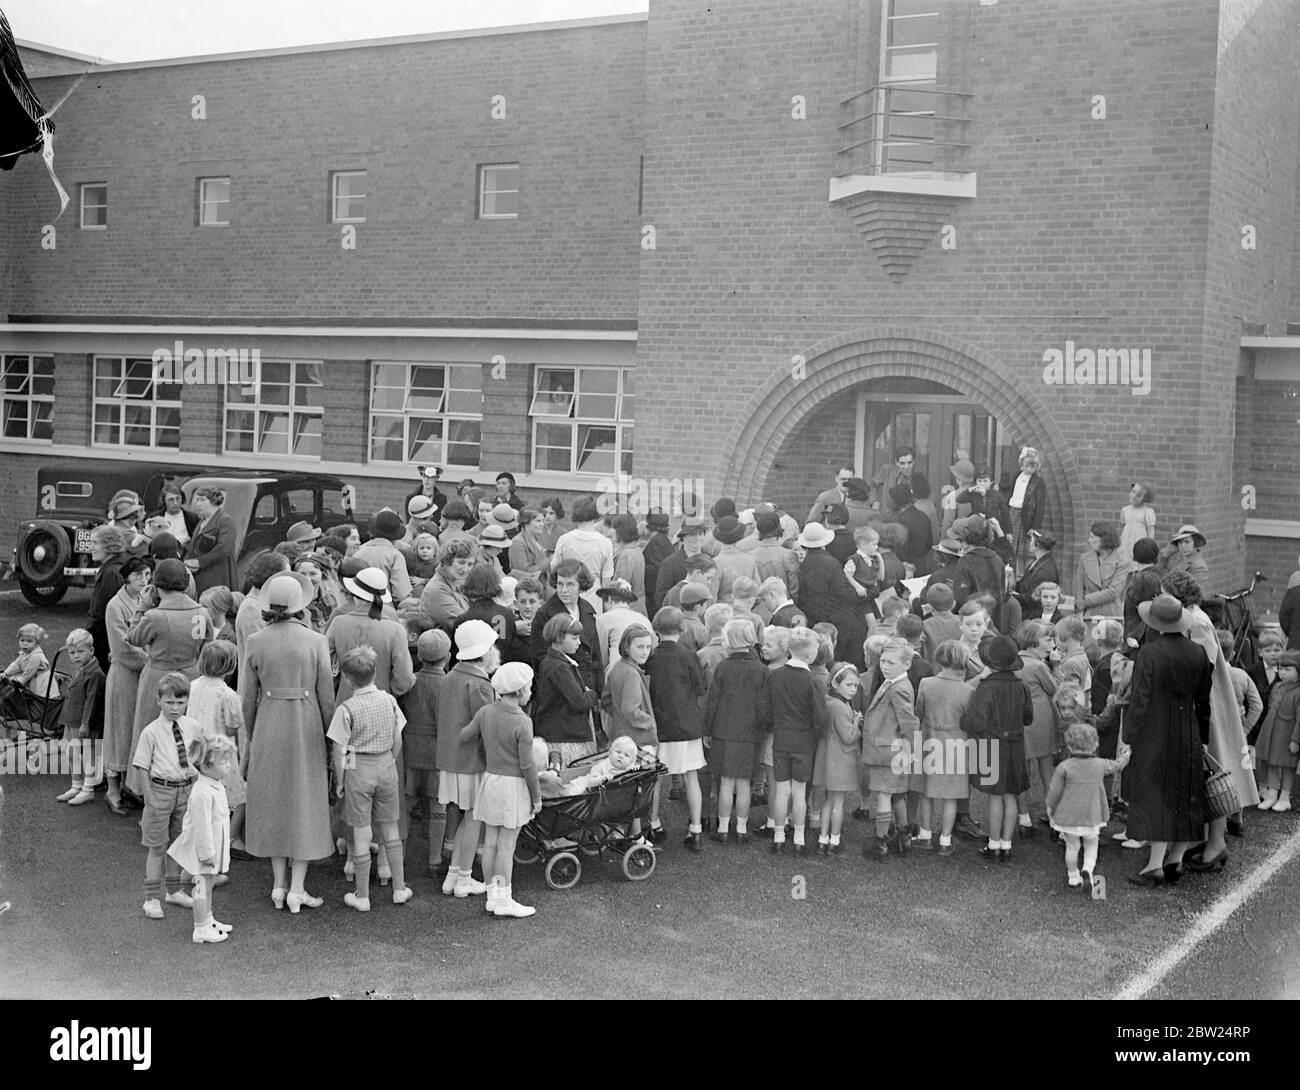 120 Southall children in 'school strike'. Although the new term was due to begin, there was no school for 120 children living at the Lady Margaret estate, Southall, Middlesex, their parents having decided on a 'school strike' as a protest against transference of all pupils between seven and 11 years old, from North Road school to Tudor Road school. This change means a walk of more than a quarter of an hour instead of about eight minutes. Mothers took their children to the new Lady Margaret School on the estate and demanded admission for the children., Photo shows, mothers and children locked o Stock Photo